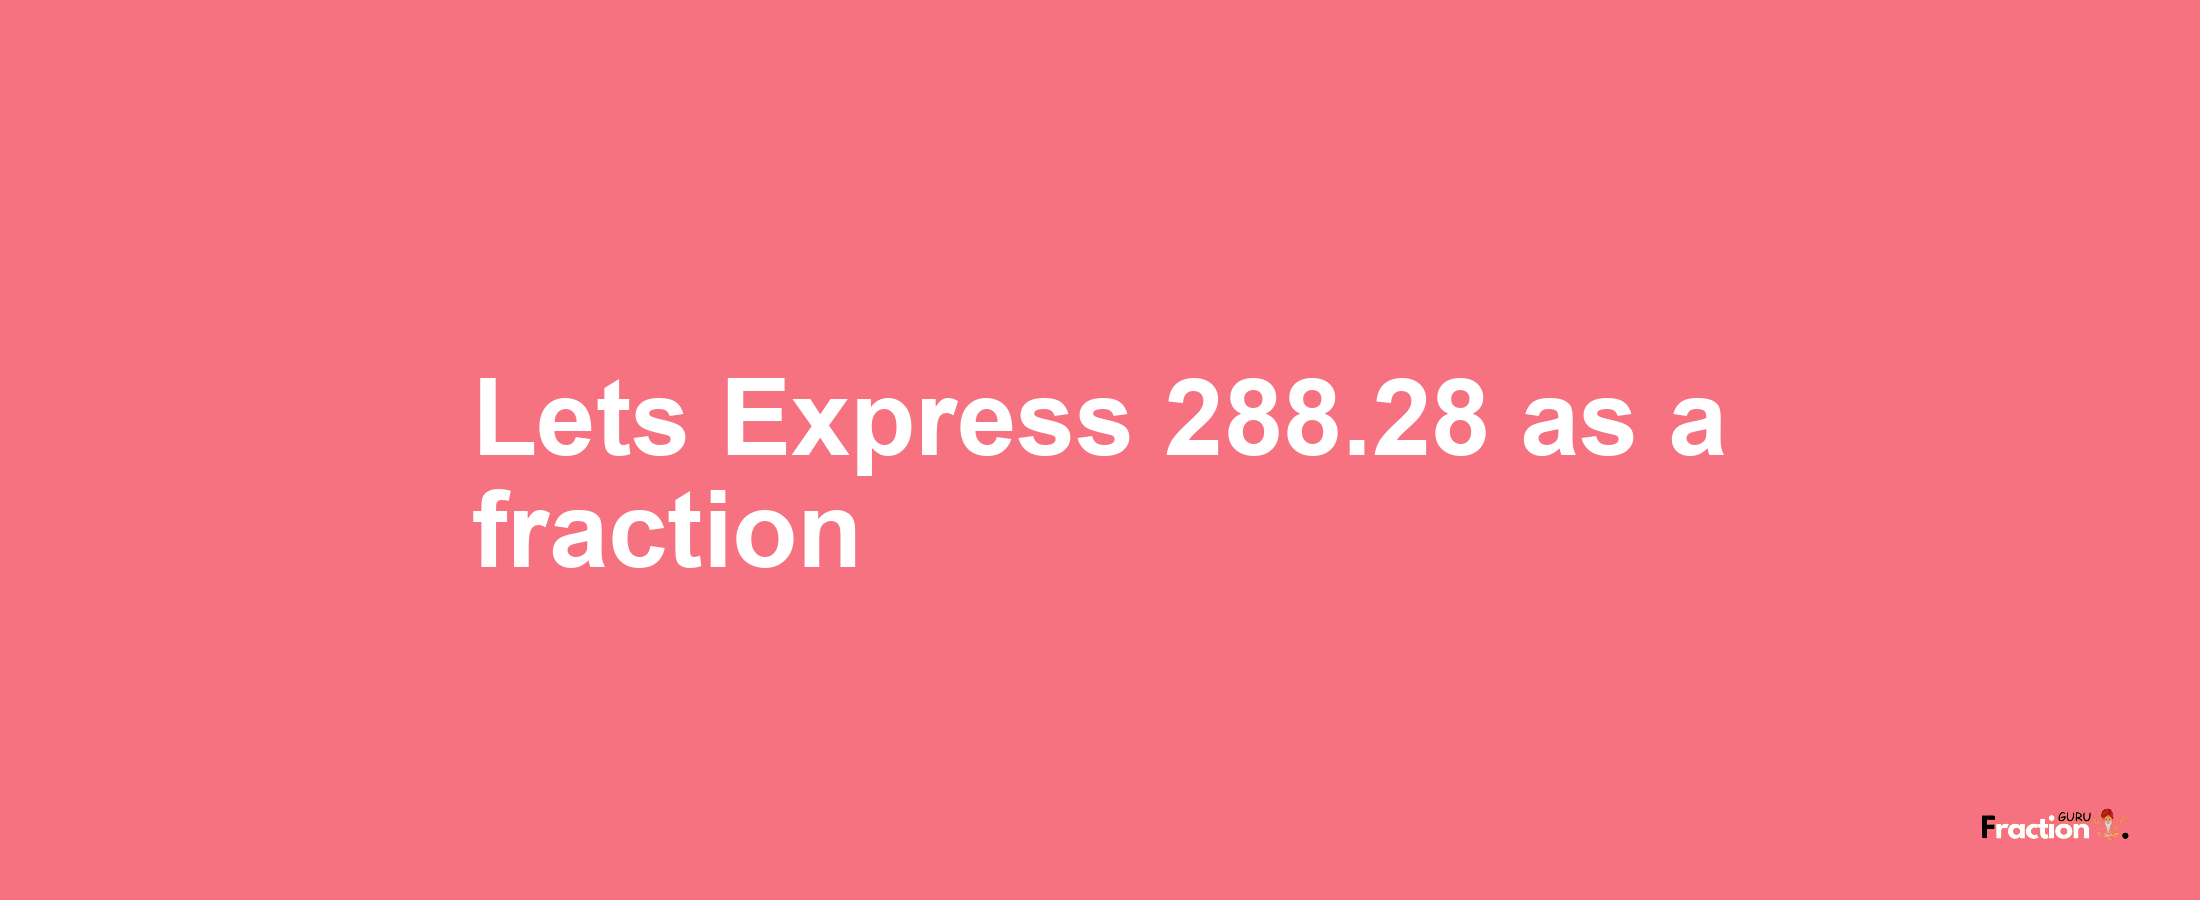 Lets Express 288.28 as afraction